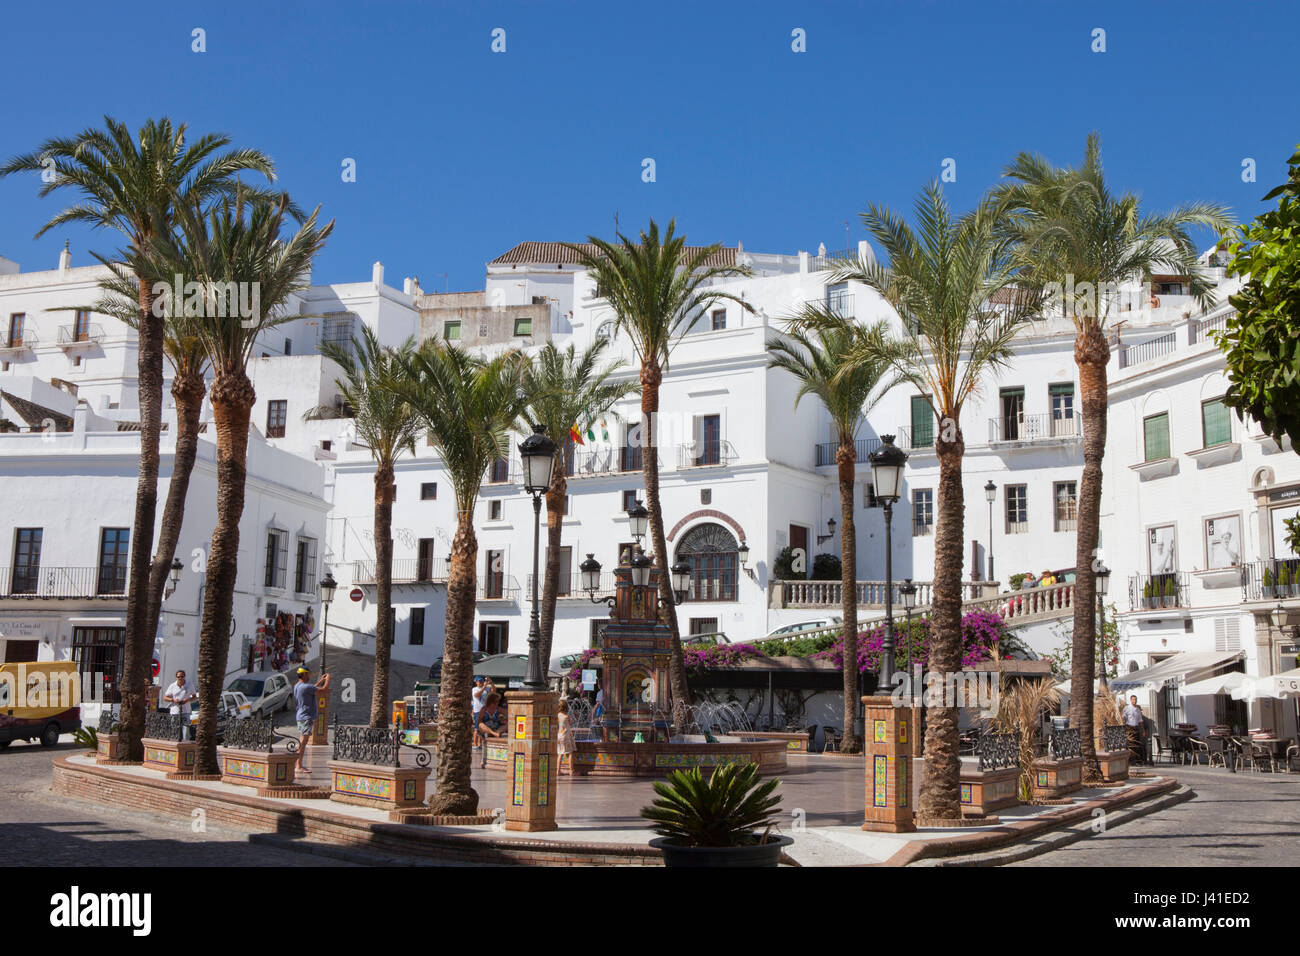 White village in the historical town of Vejer de la Frontera, Cadiz Province, Andalusia, Spain, Europe Stock Photo